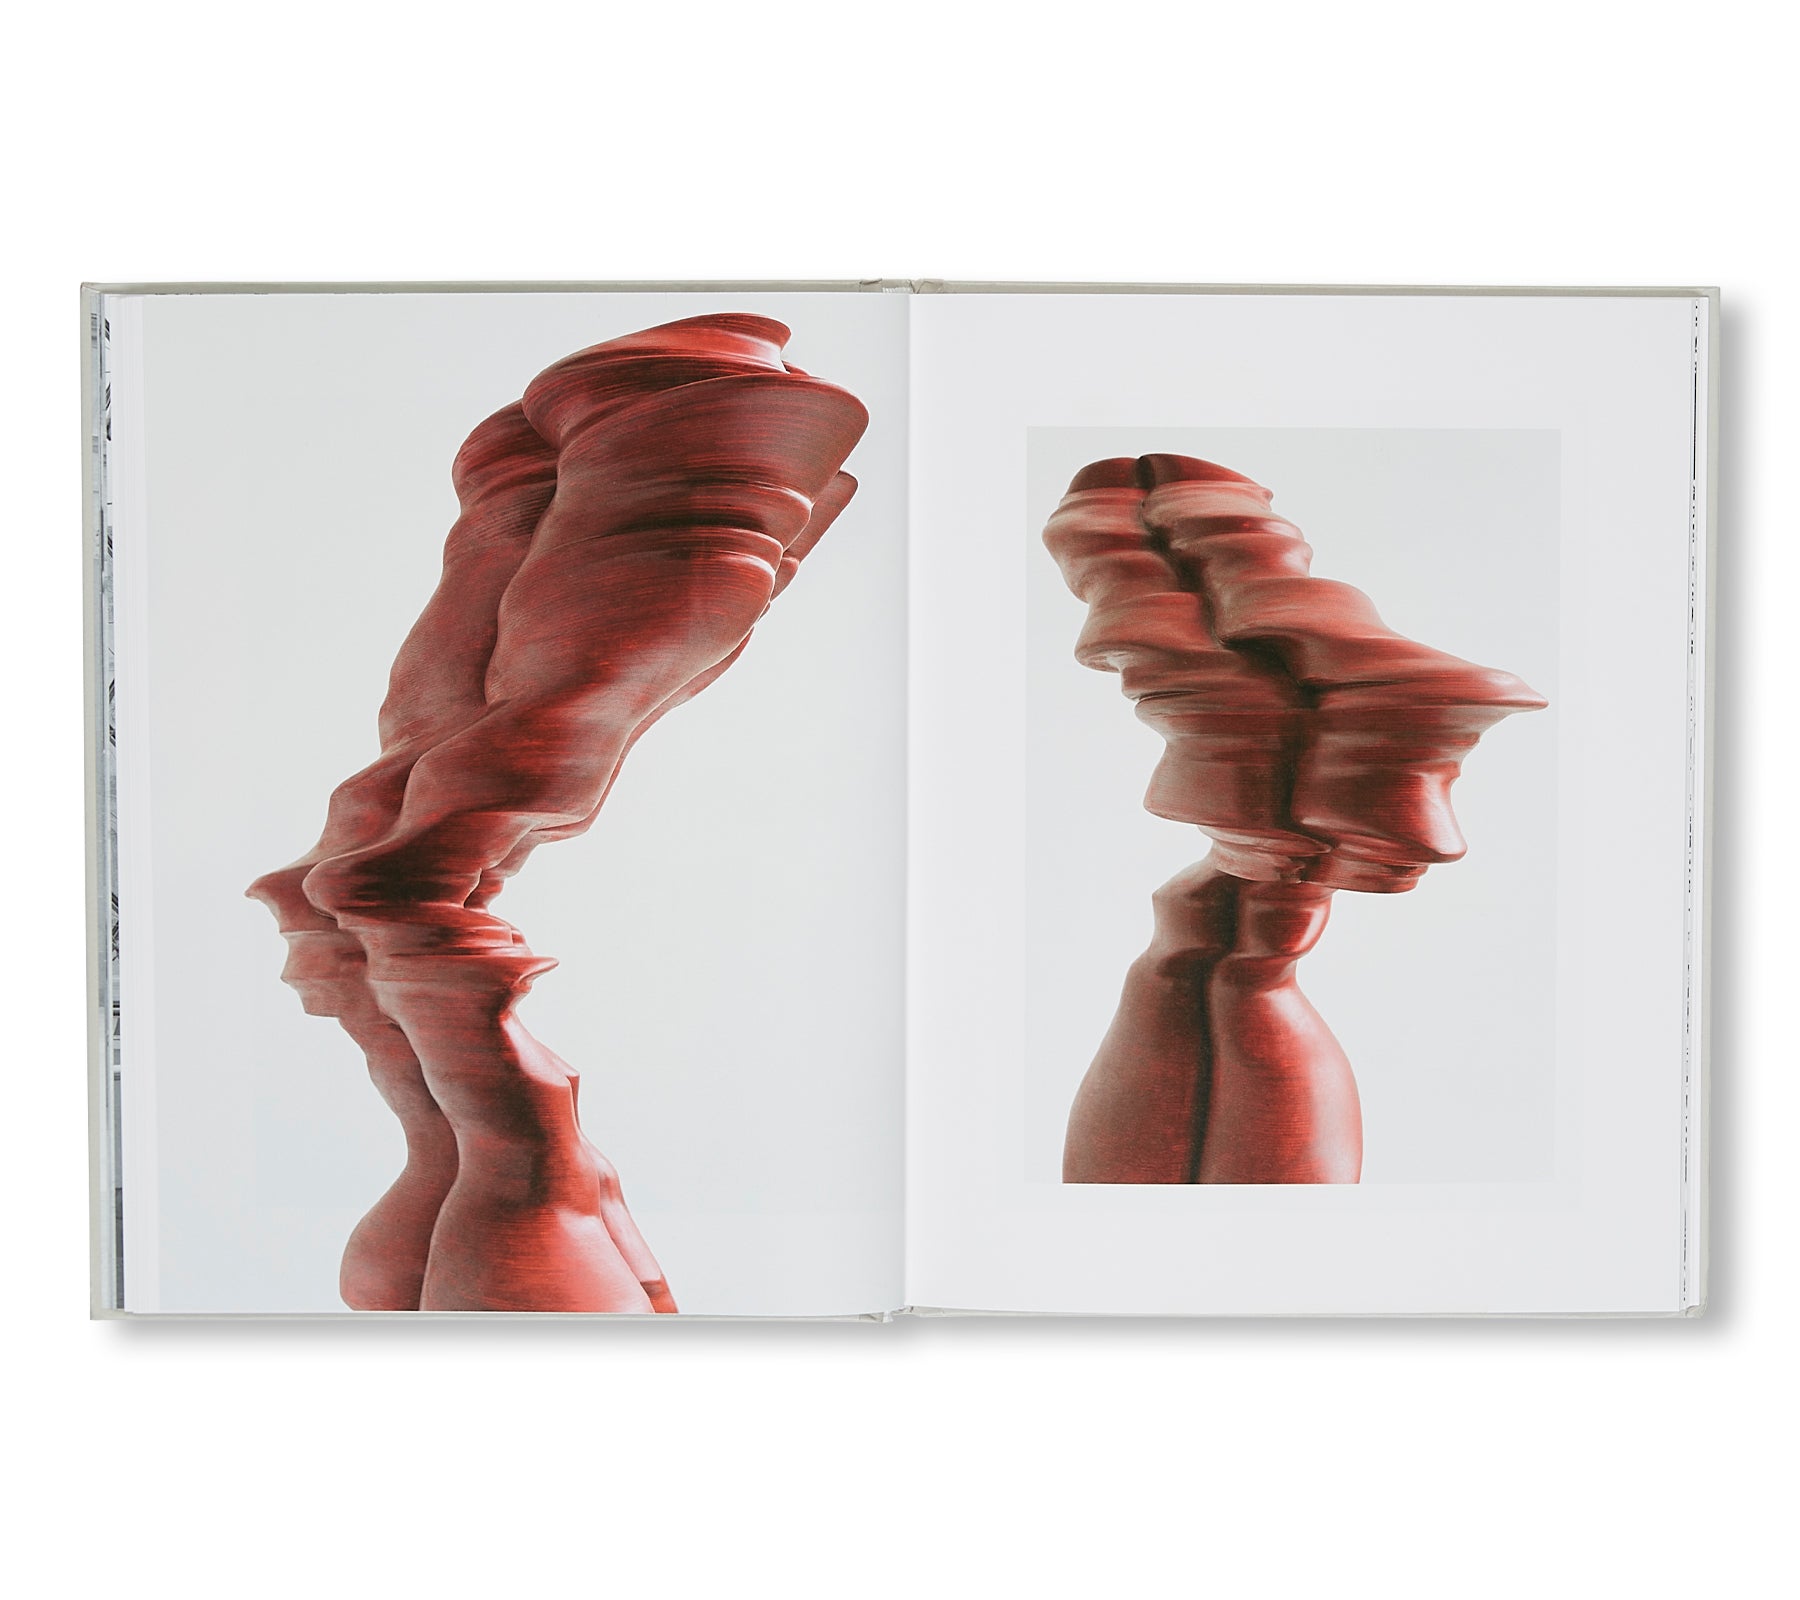 FIGURE OUT FIGURE IN by Tony Cragg